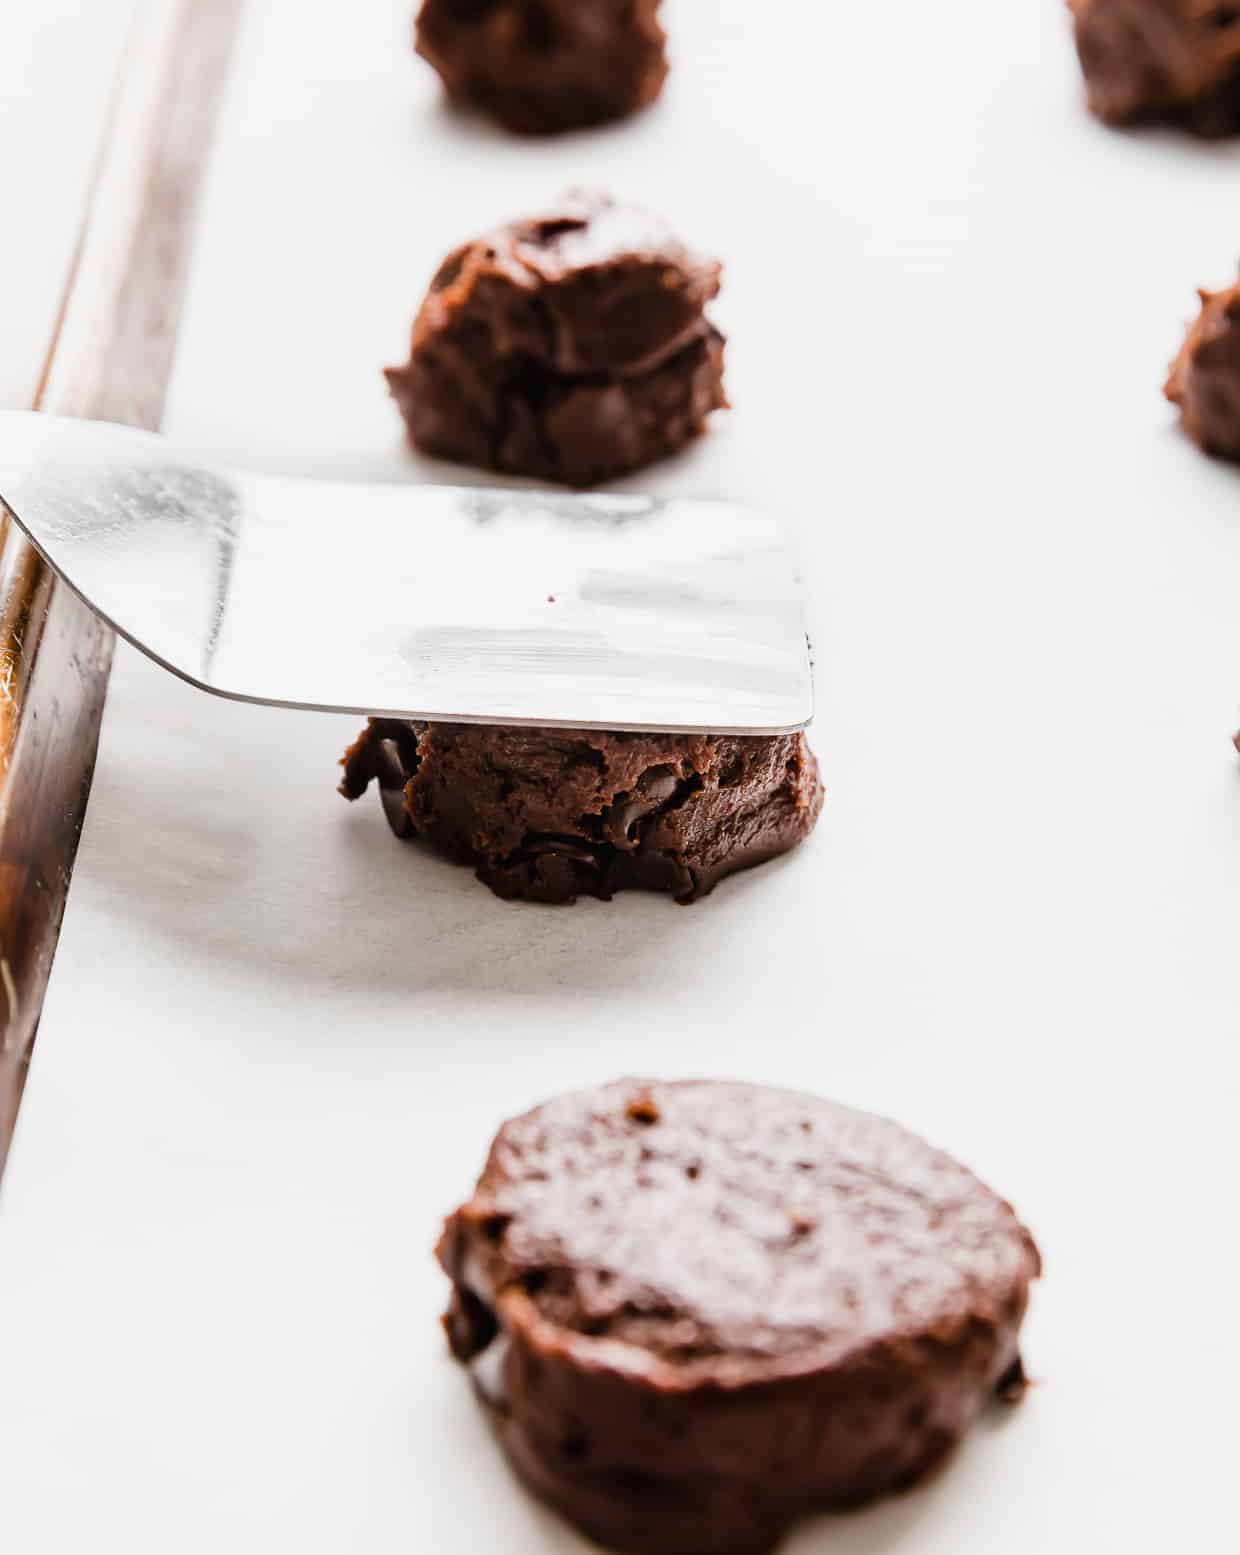 A metal spatula pressing down on a chocolate cookie dough ball on a baking sheet.